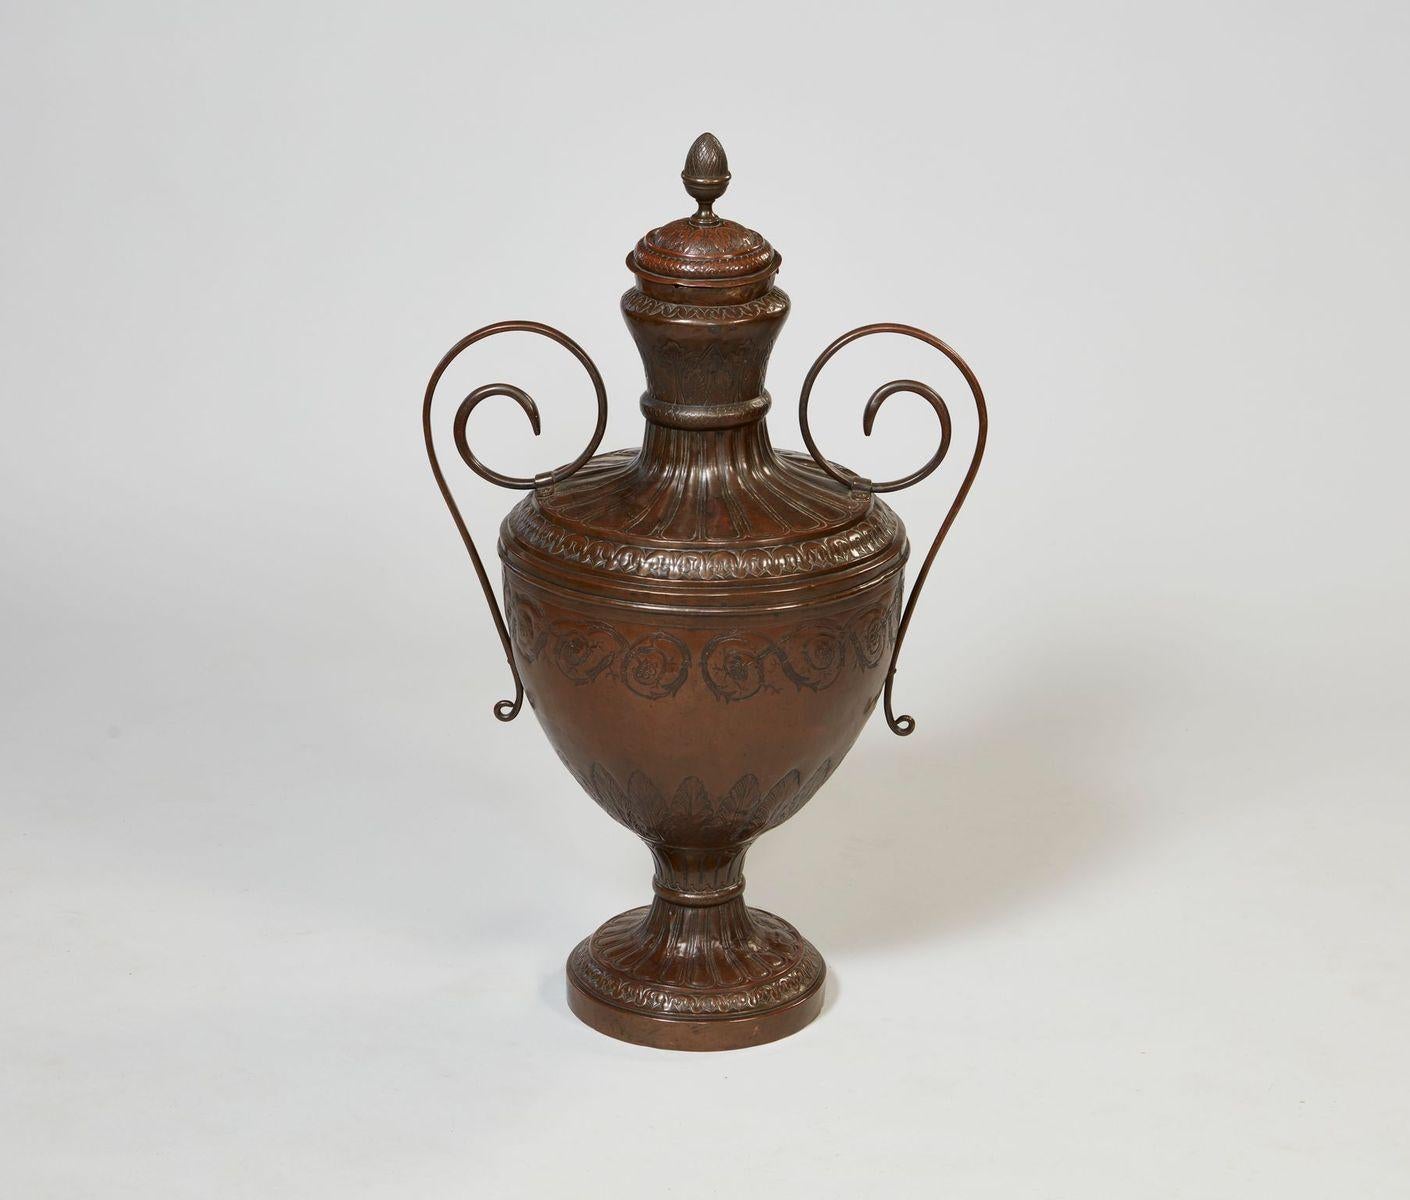 Rare and substantial French early 18th century copper wine urn, the acanthus leaf decorated lid with pineapple finial, the gadrooned body with scrolled handles, the whole profusely chased and etched surface depicting classical motifs and having